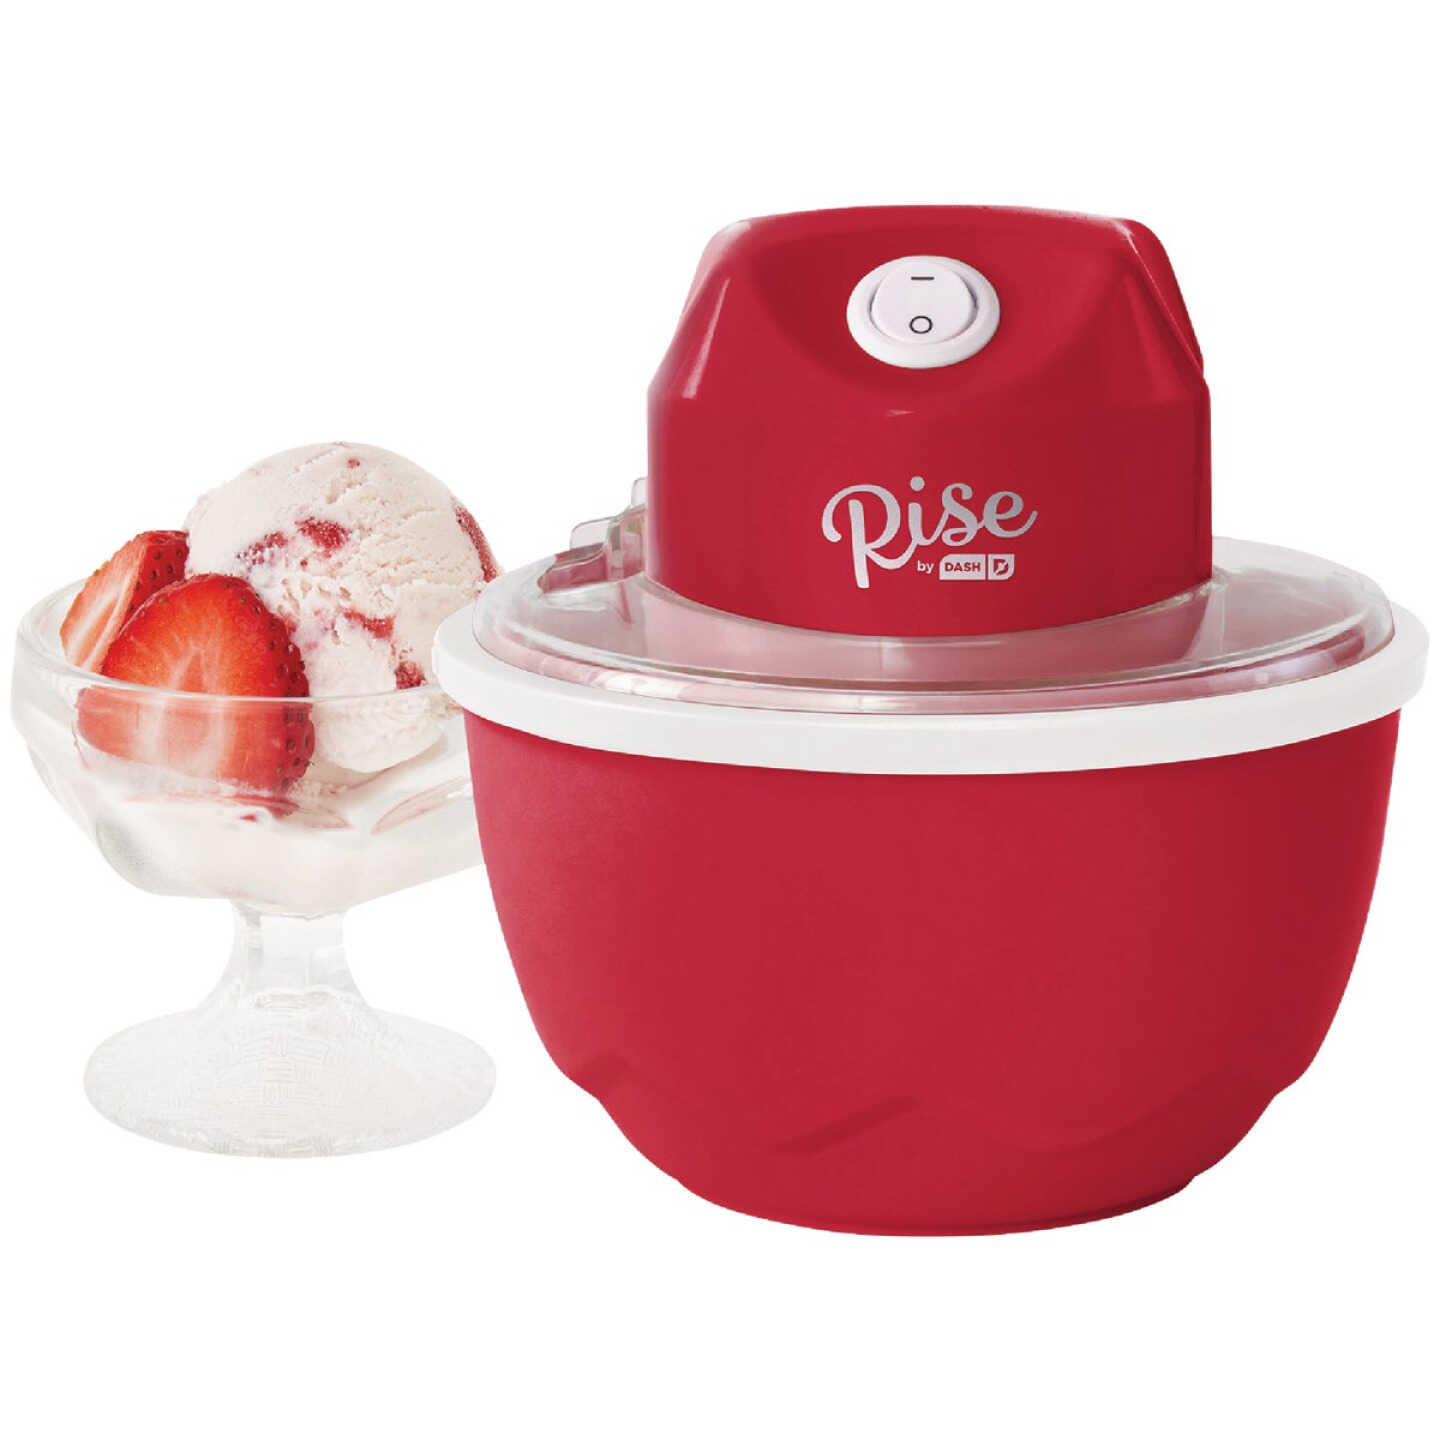 Rise By Dash Personal Electric Ice Cream Maker - Power Townsend Company